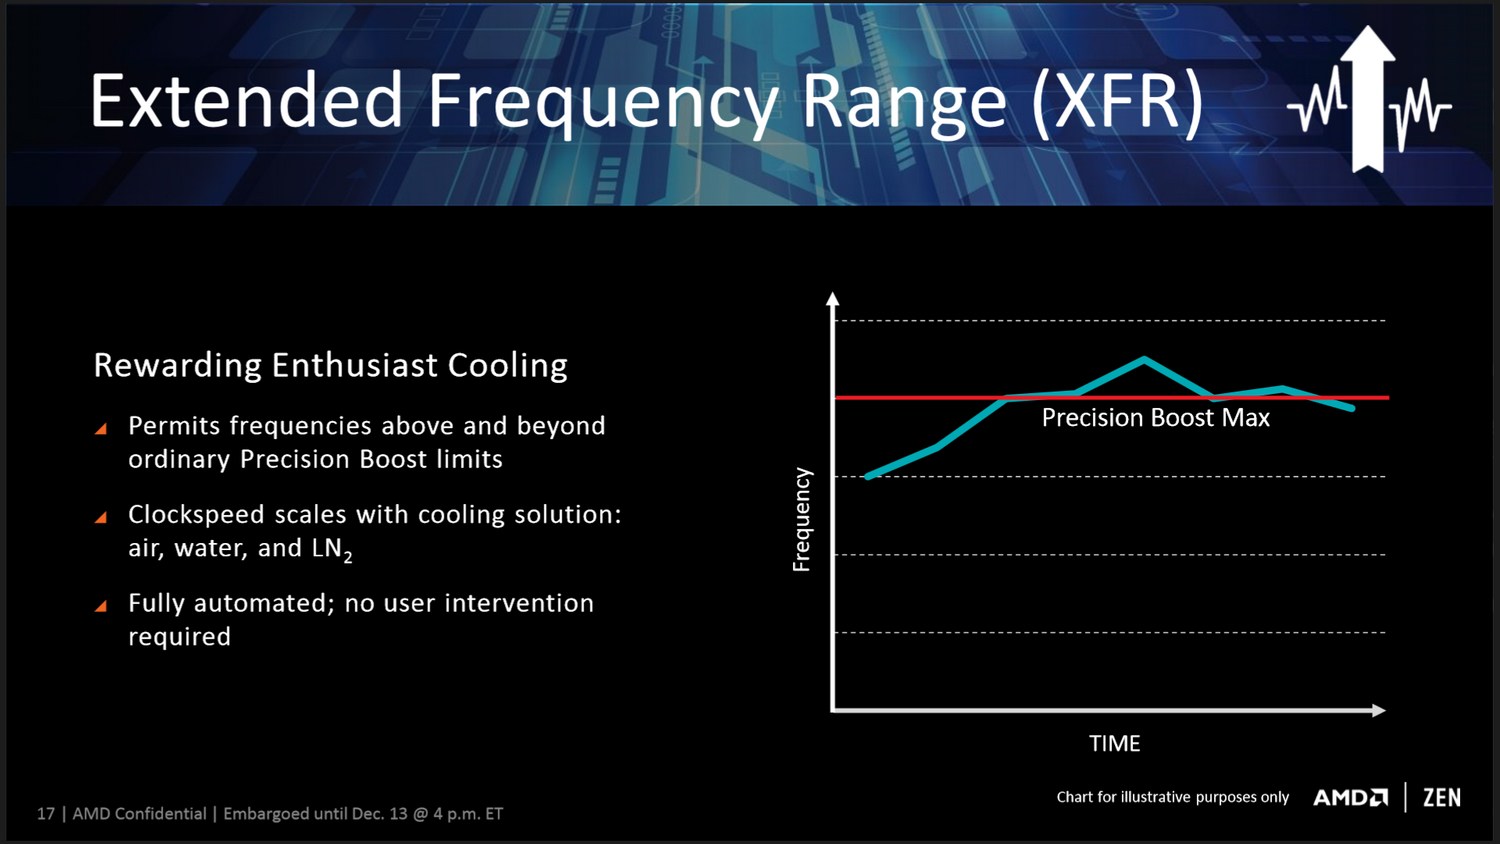 AMD XFR - Extended Frequency Range